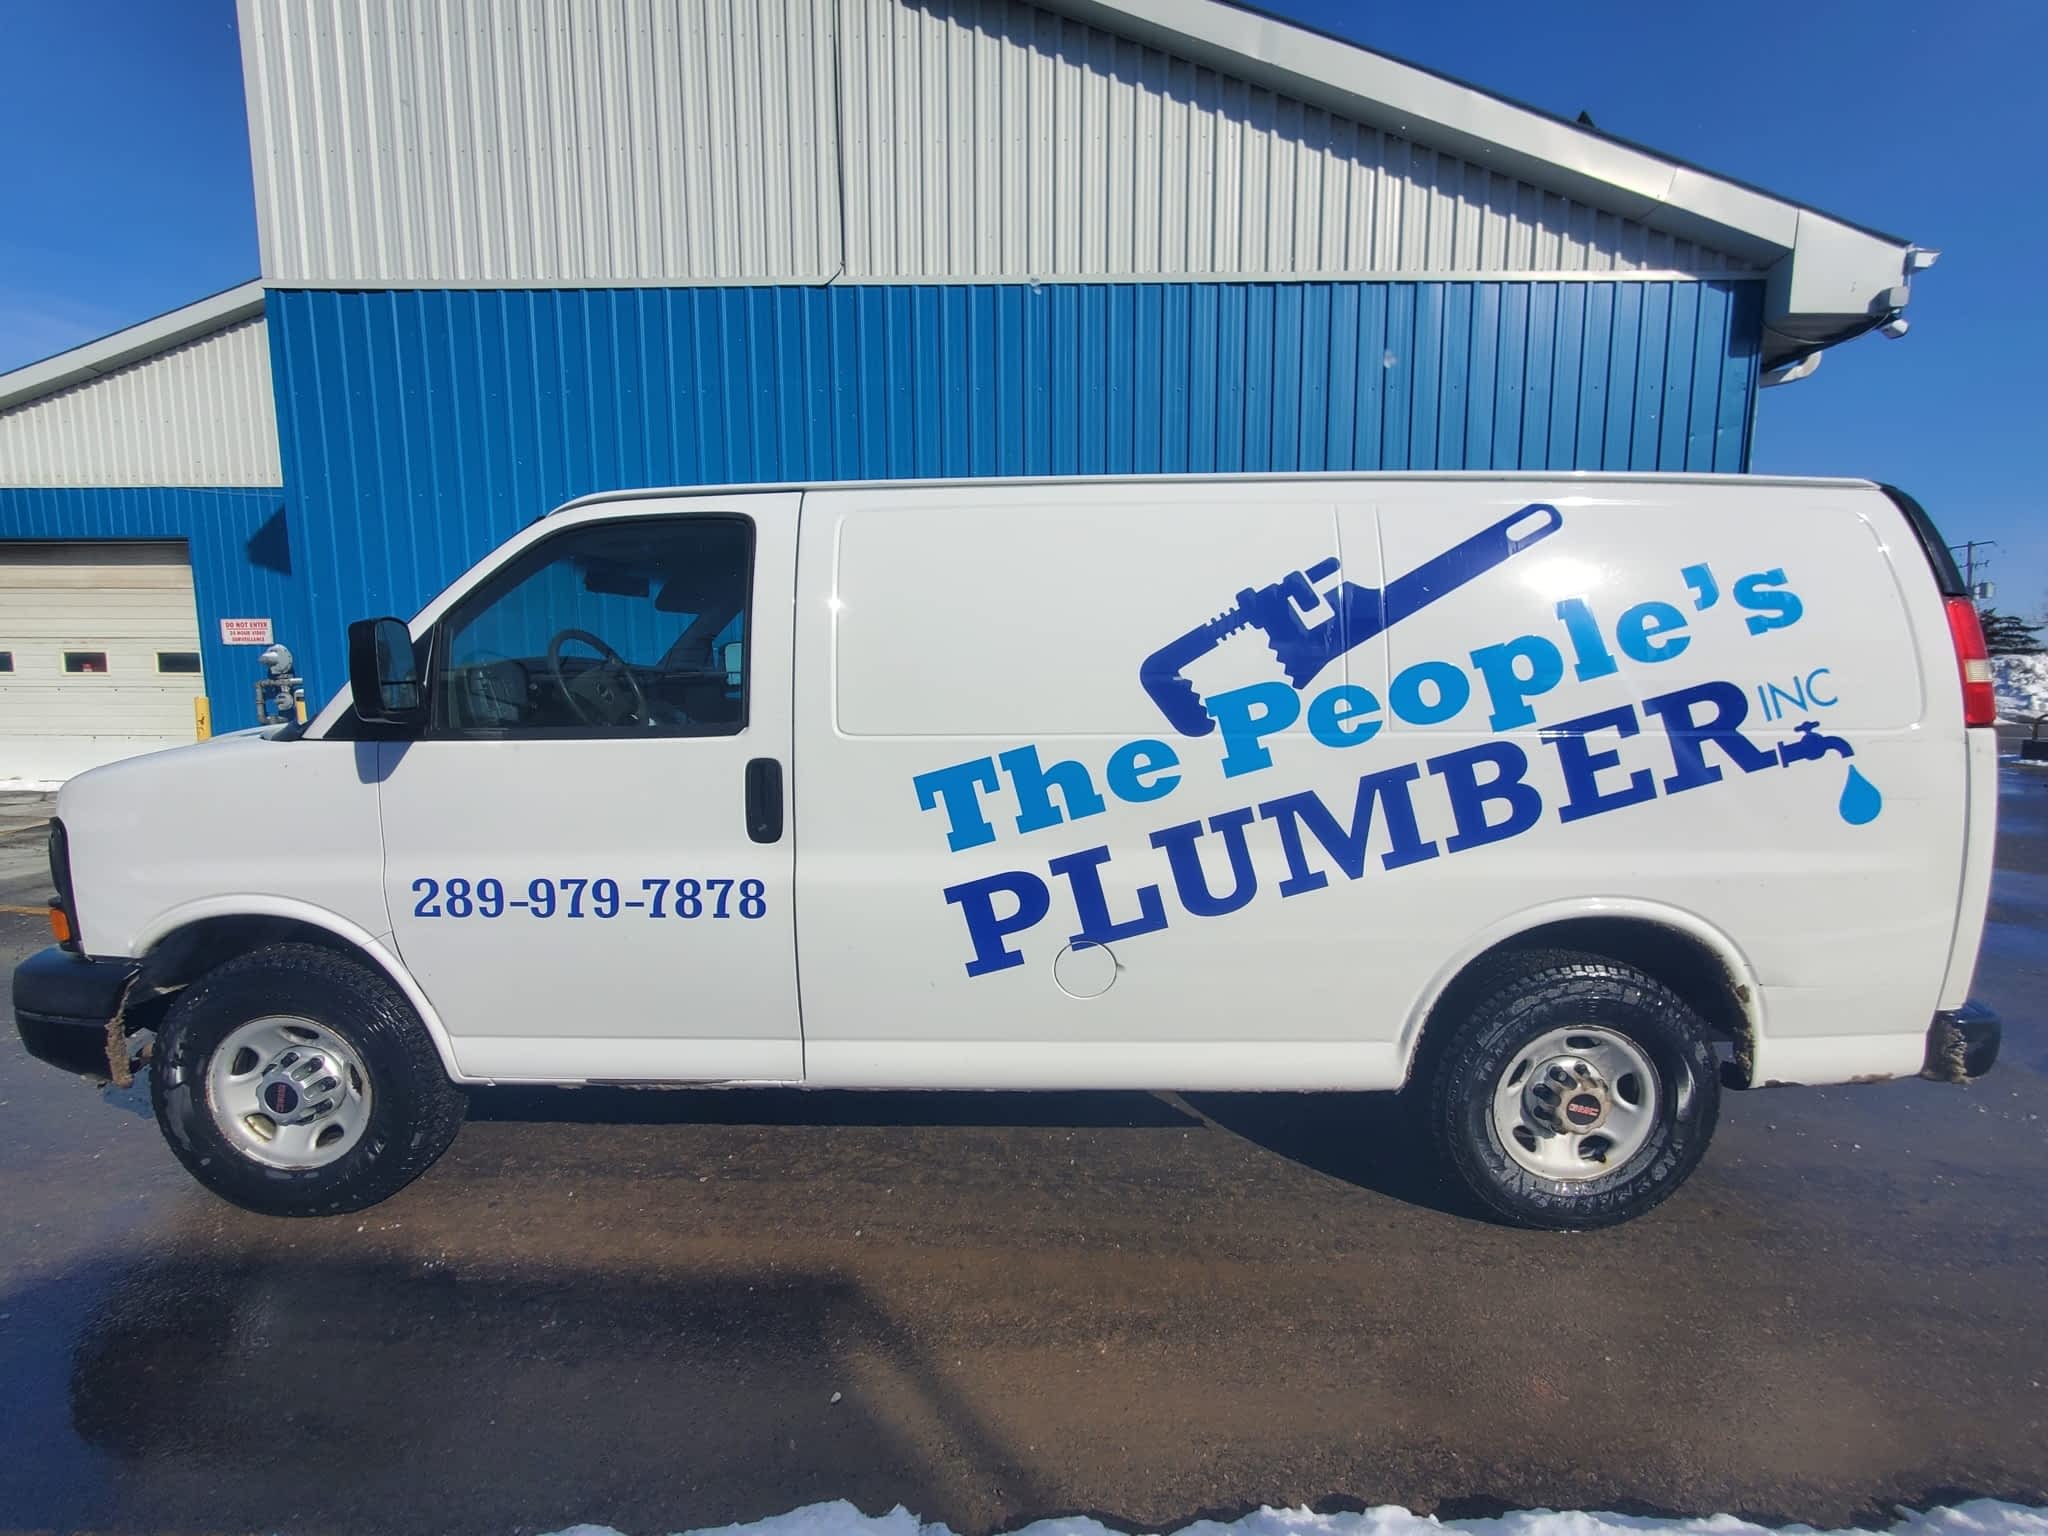 photo The People's Plumber Inc.